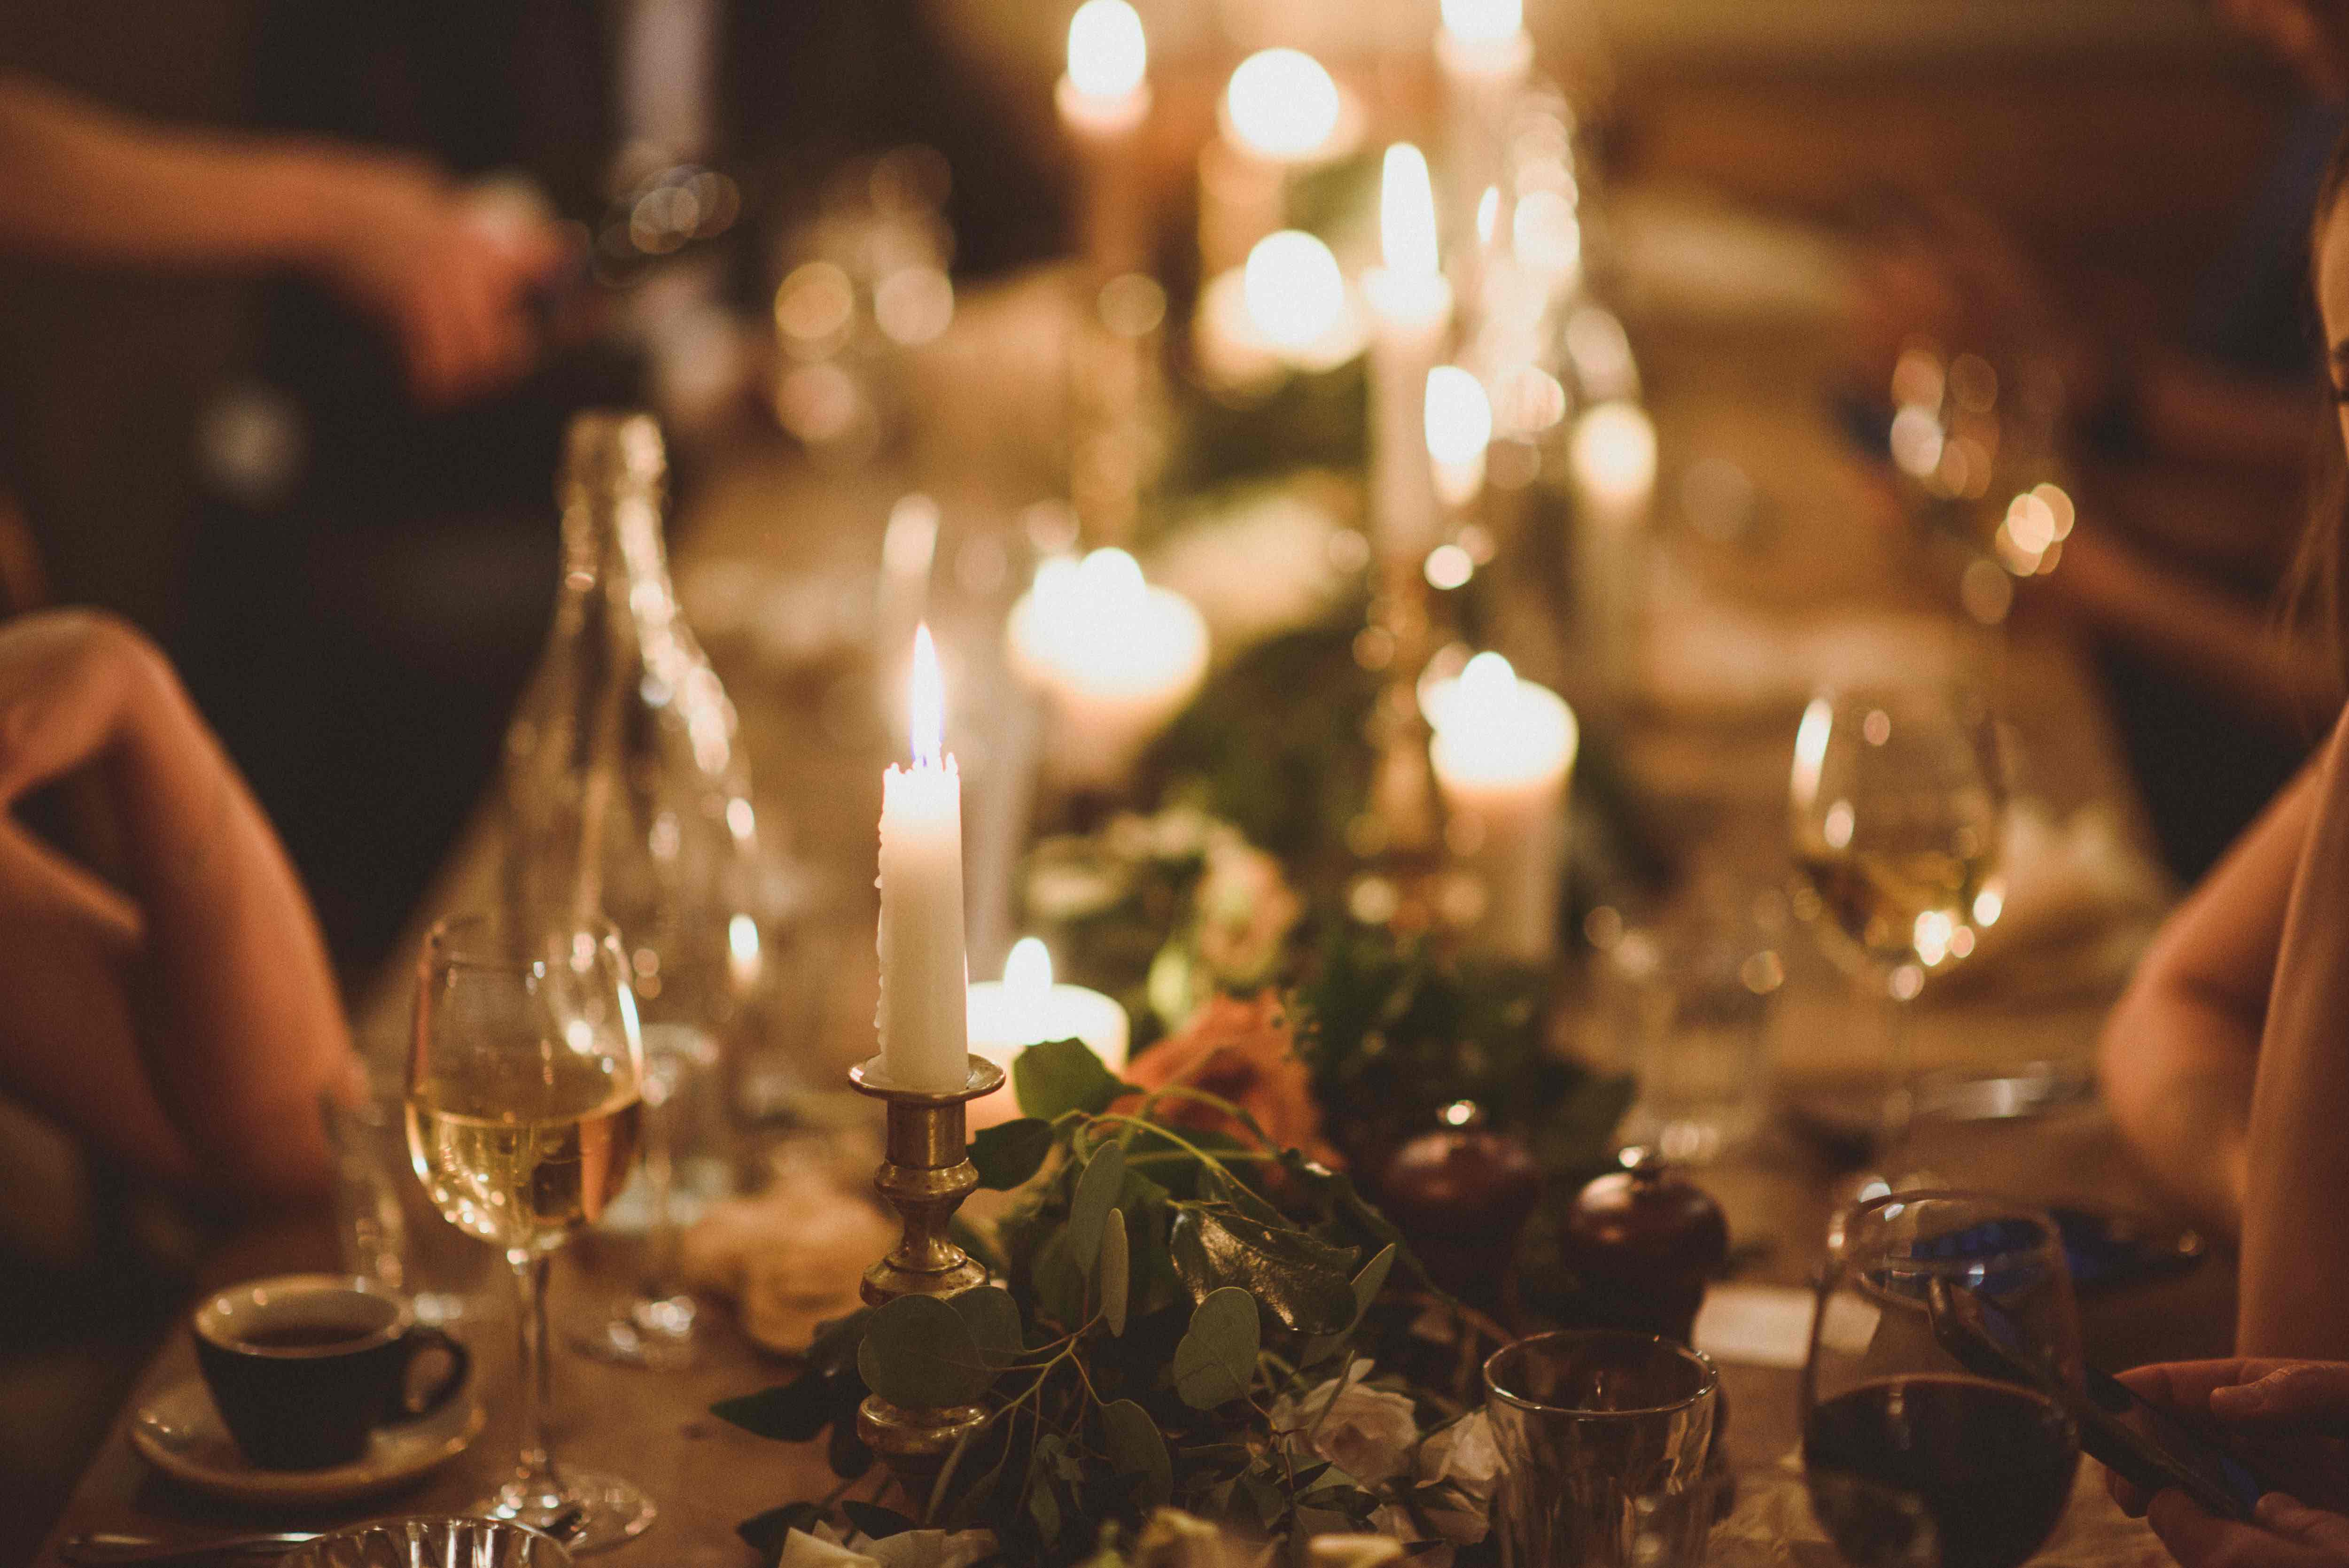 Good food, good company at this cosy winter wedding reception at The Orange Public House & Hotel